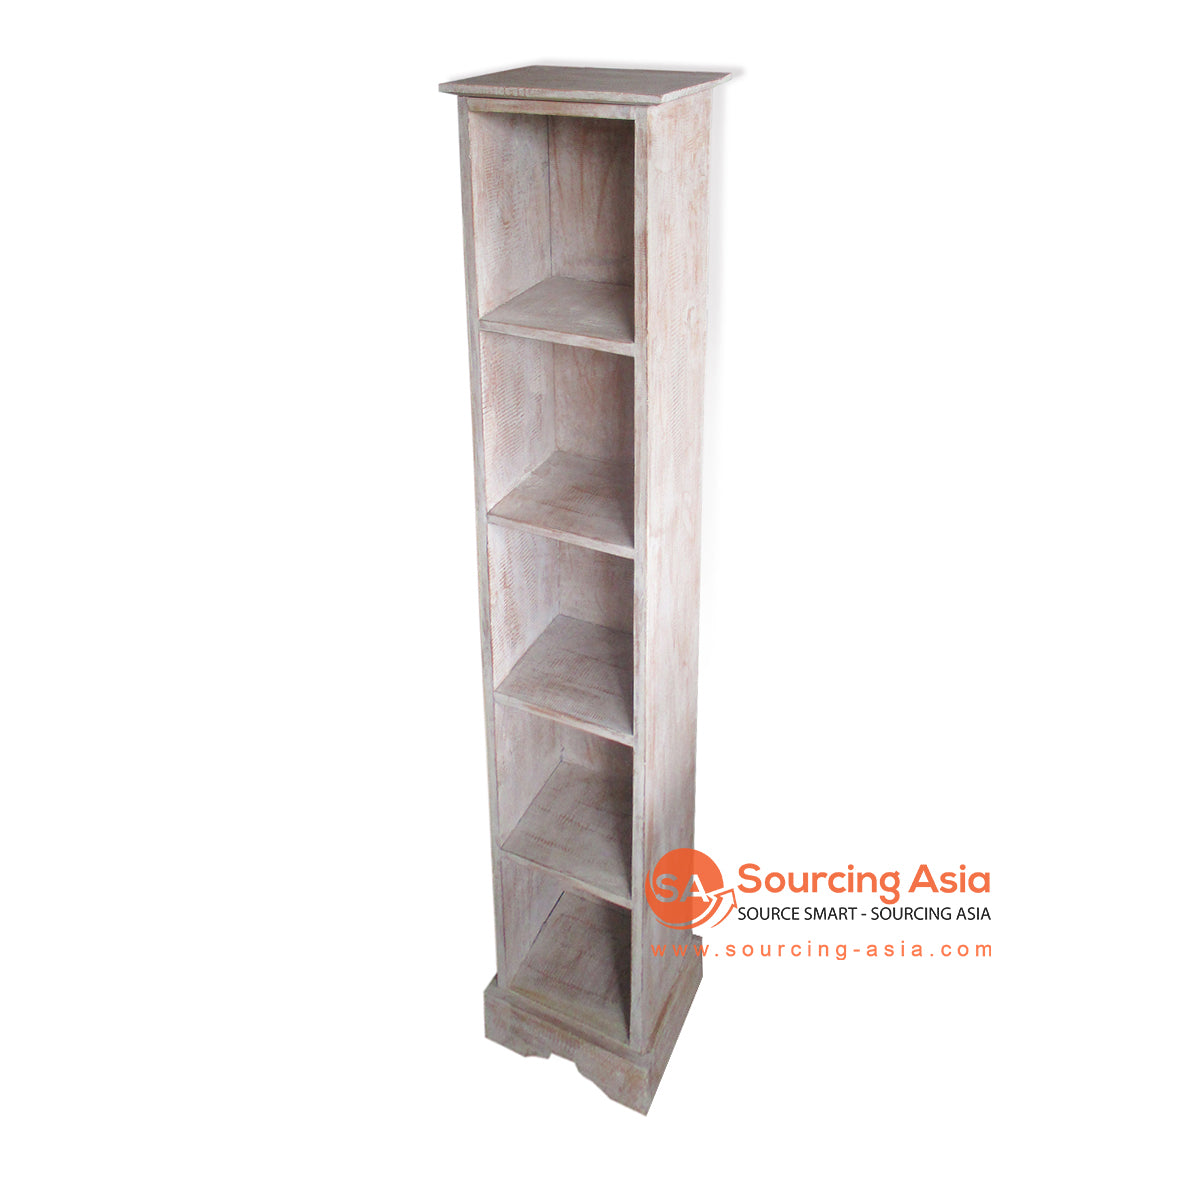 THE009-120BW BROWN WASH WOODEN DVD SHELF WITH FIVE SLOTS